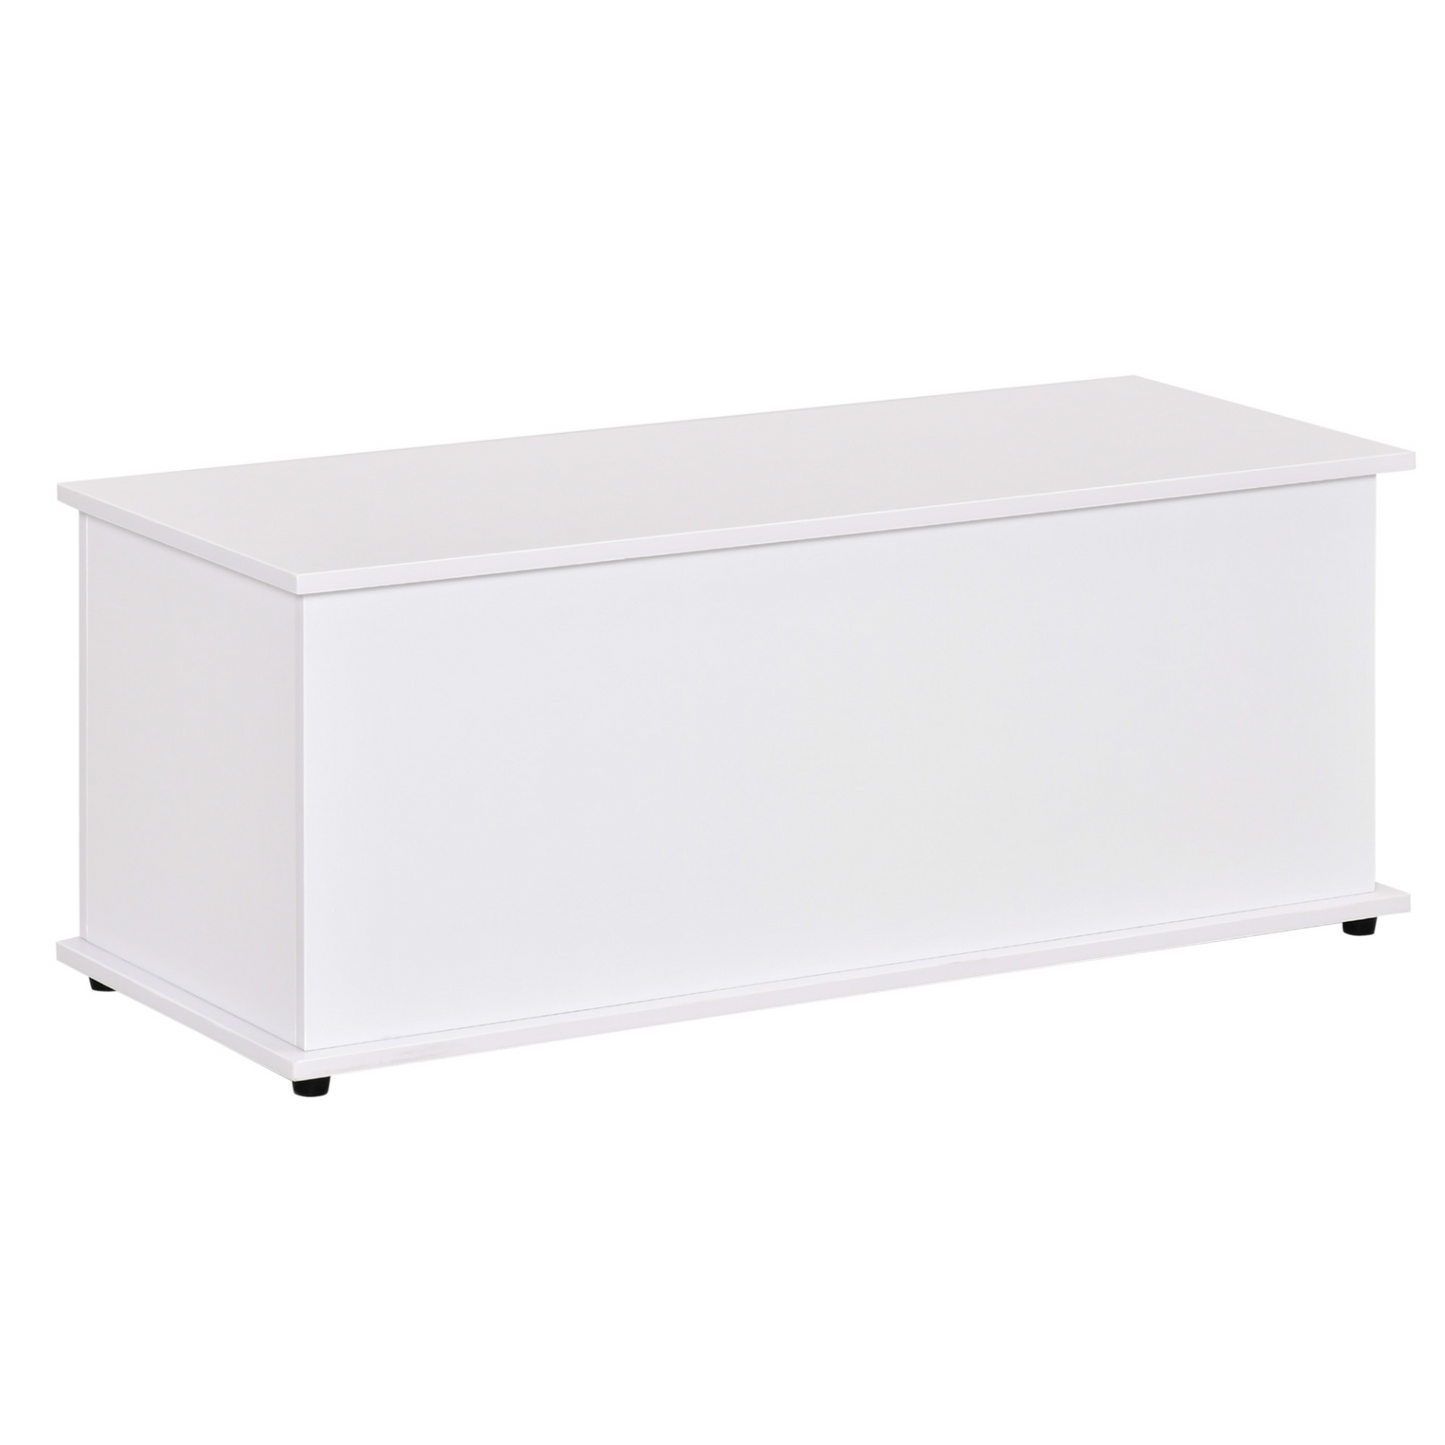 HOMCOM Wooden Storage Box Clothes Toy Chest Bench Seat Ottoman Bedding Blanket Trunk Container with Lid - White